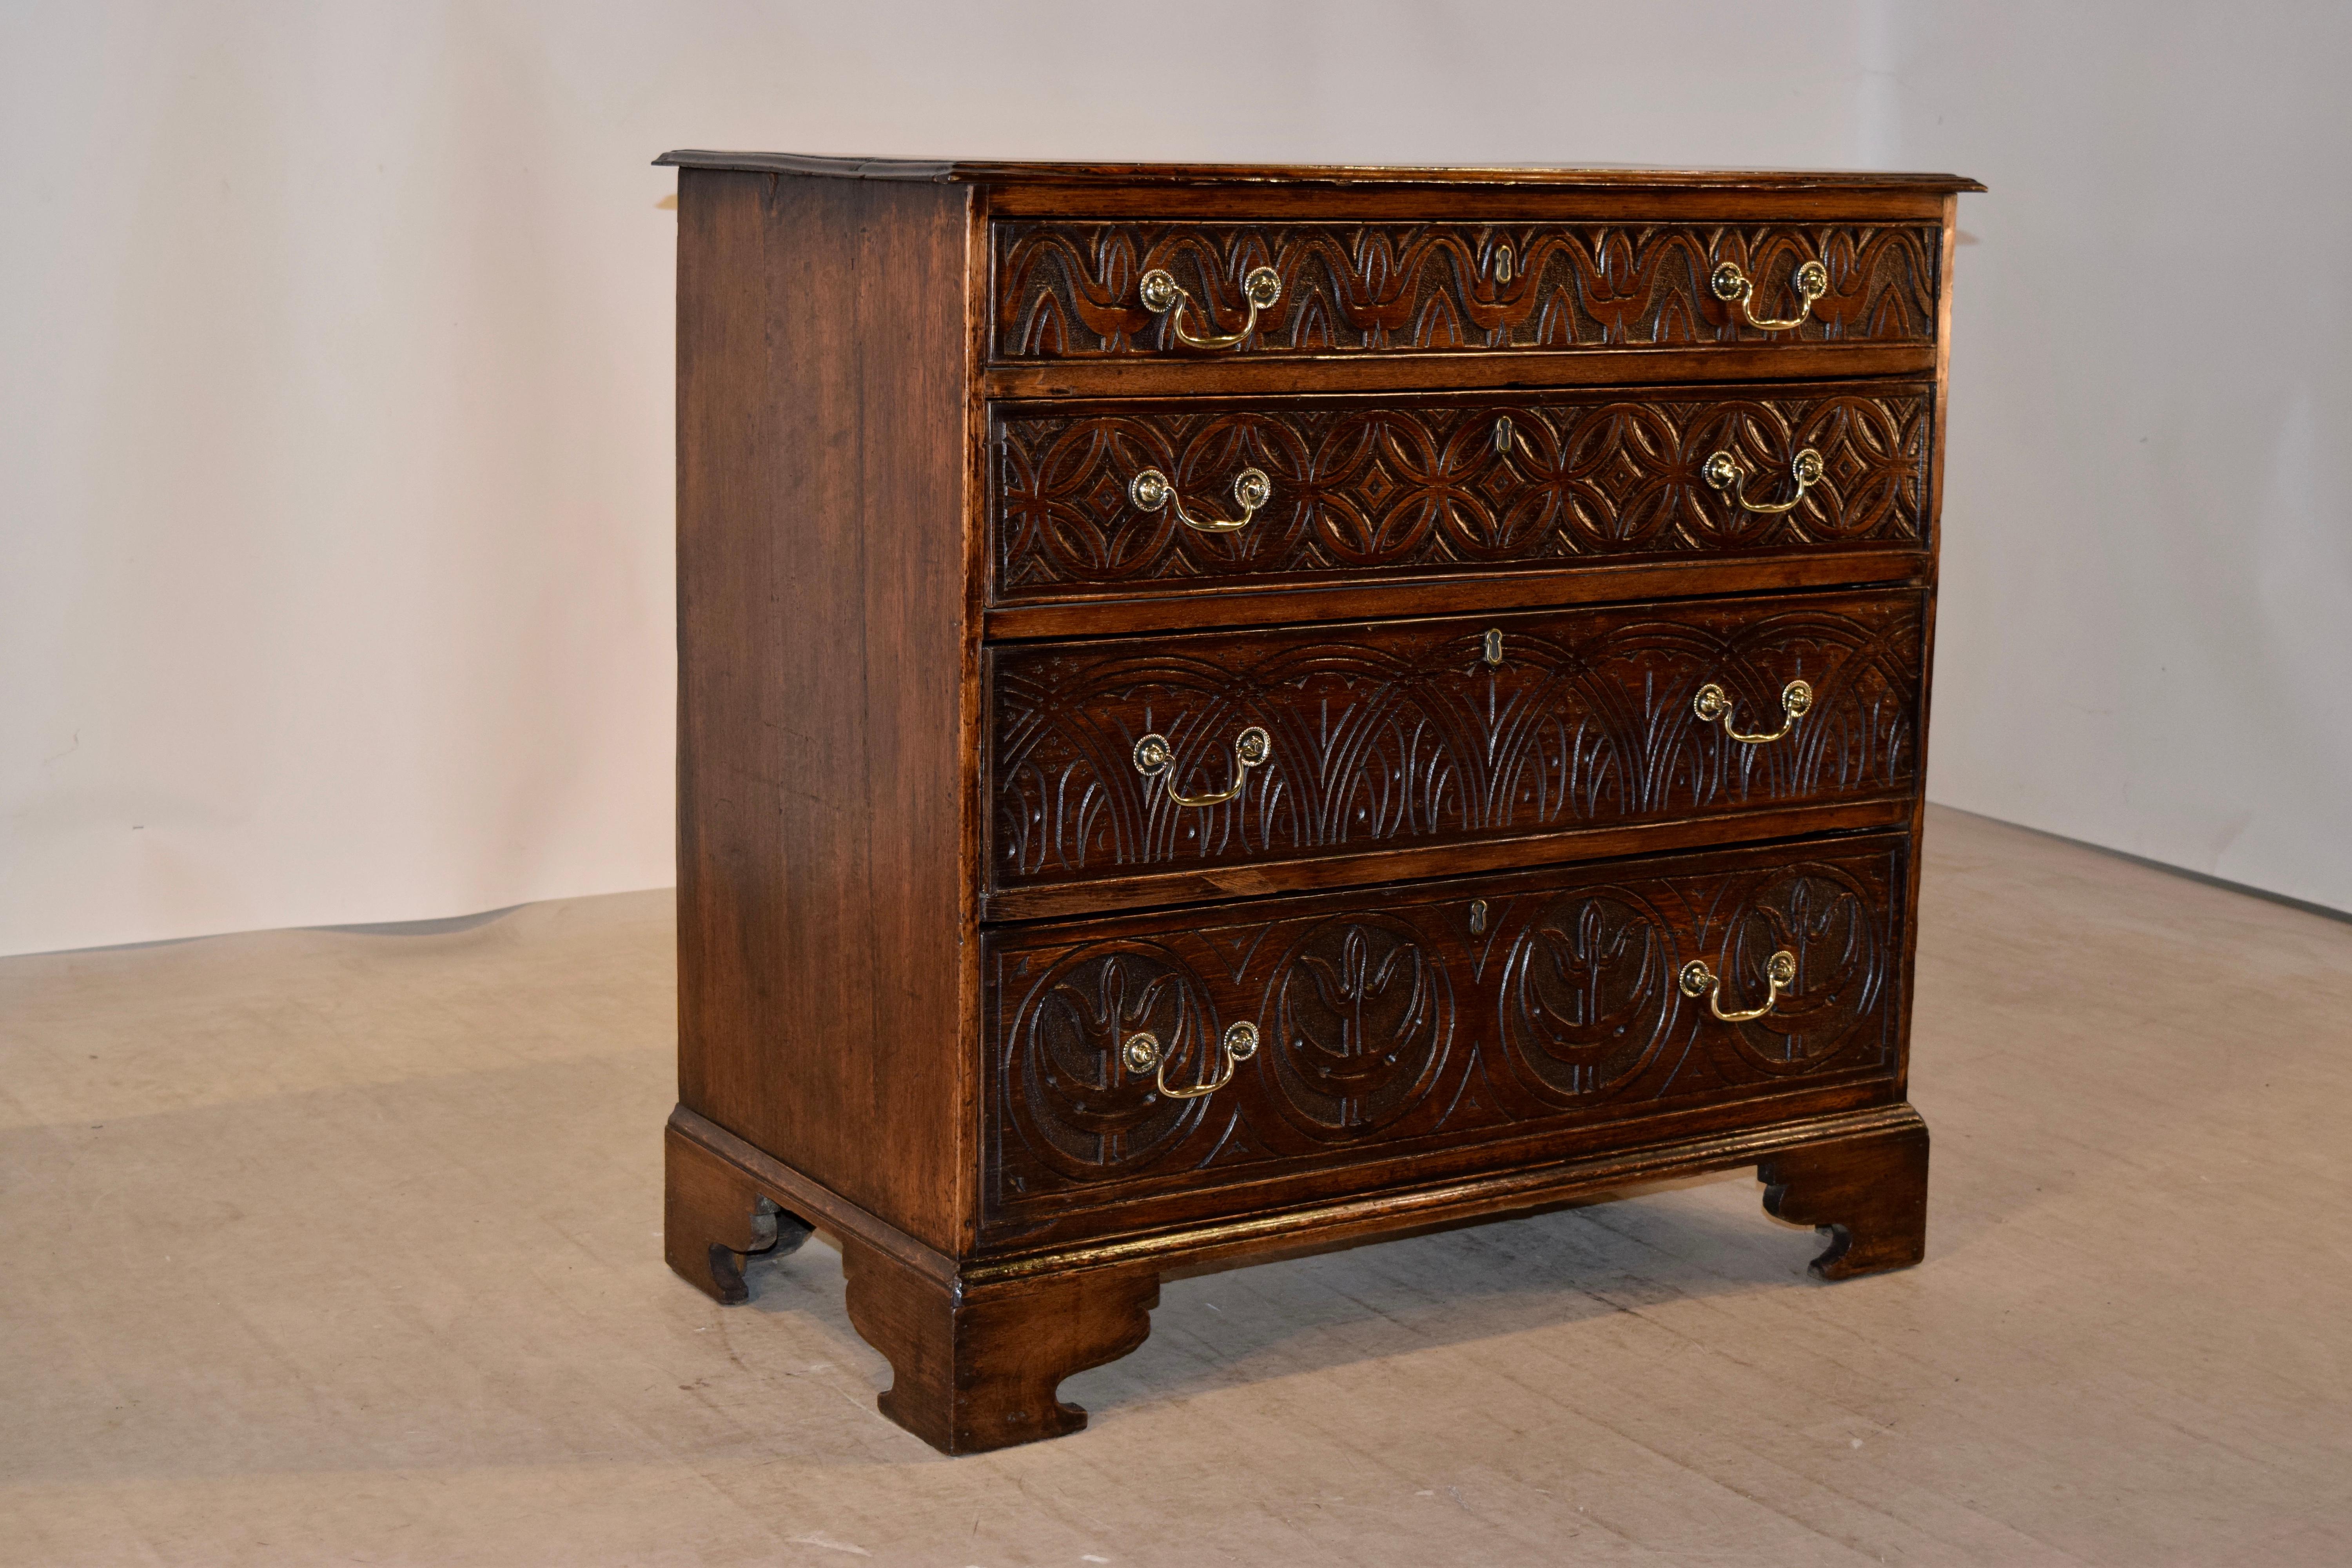 Early 18th century English oak chest with a bevelled edge around the top following down to simple sides and four drawers in the front, all with different hand carved decorations for a truly unique chest. The case is raised on hand carved bracket